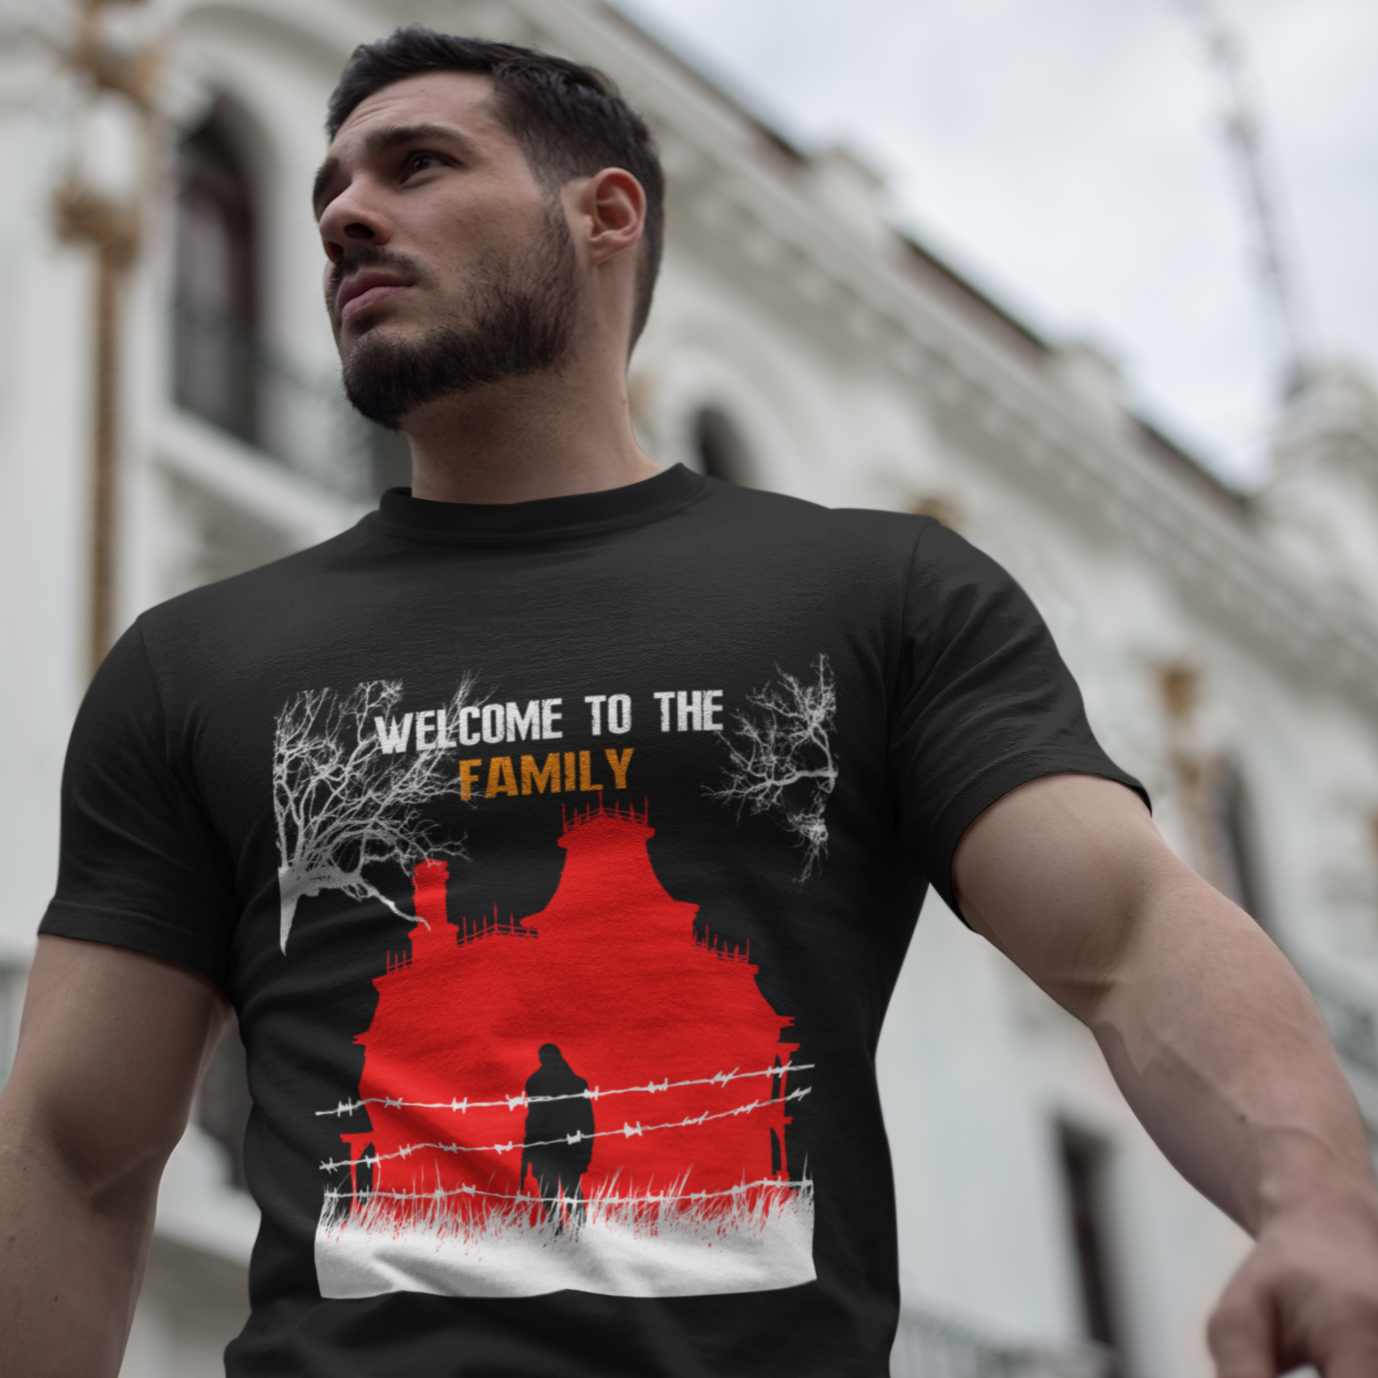 Resident Evil Men's Tee - Welcome to the Family Tee